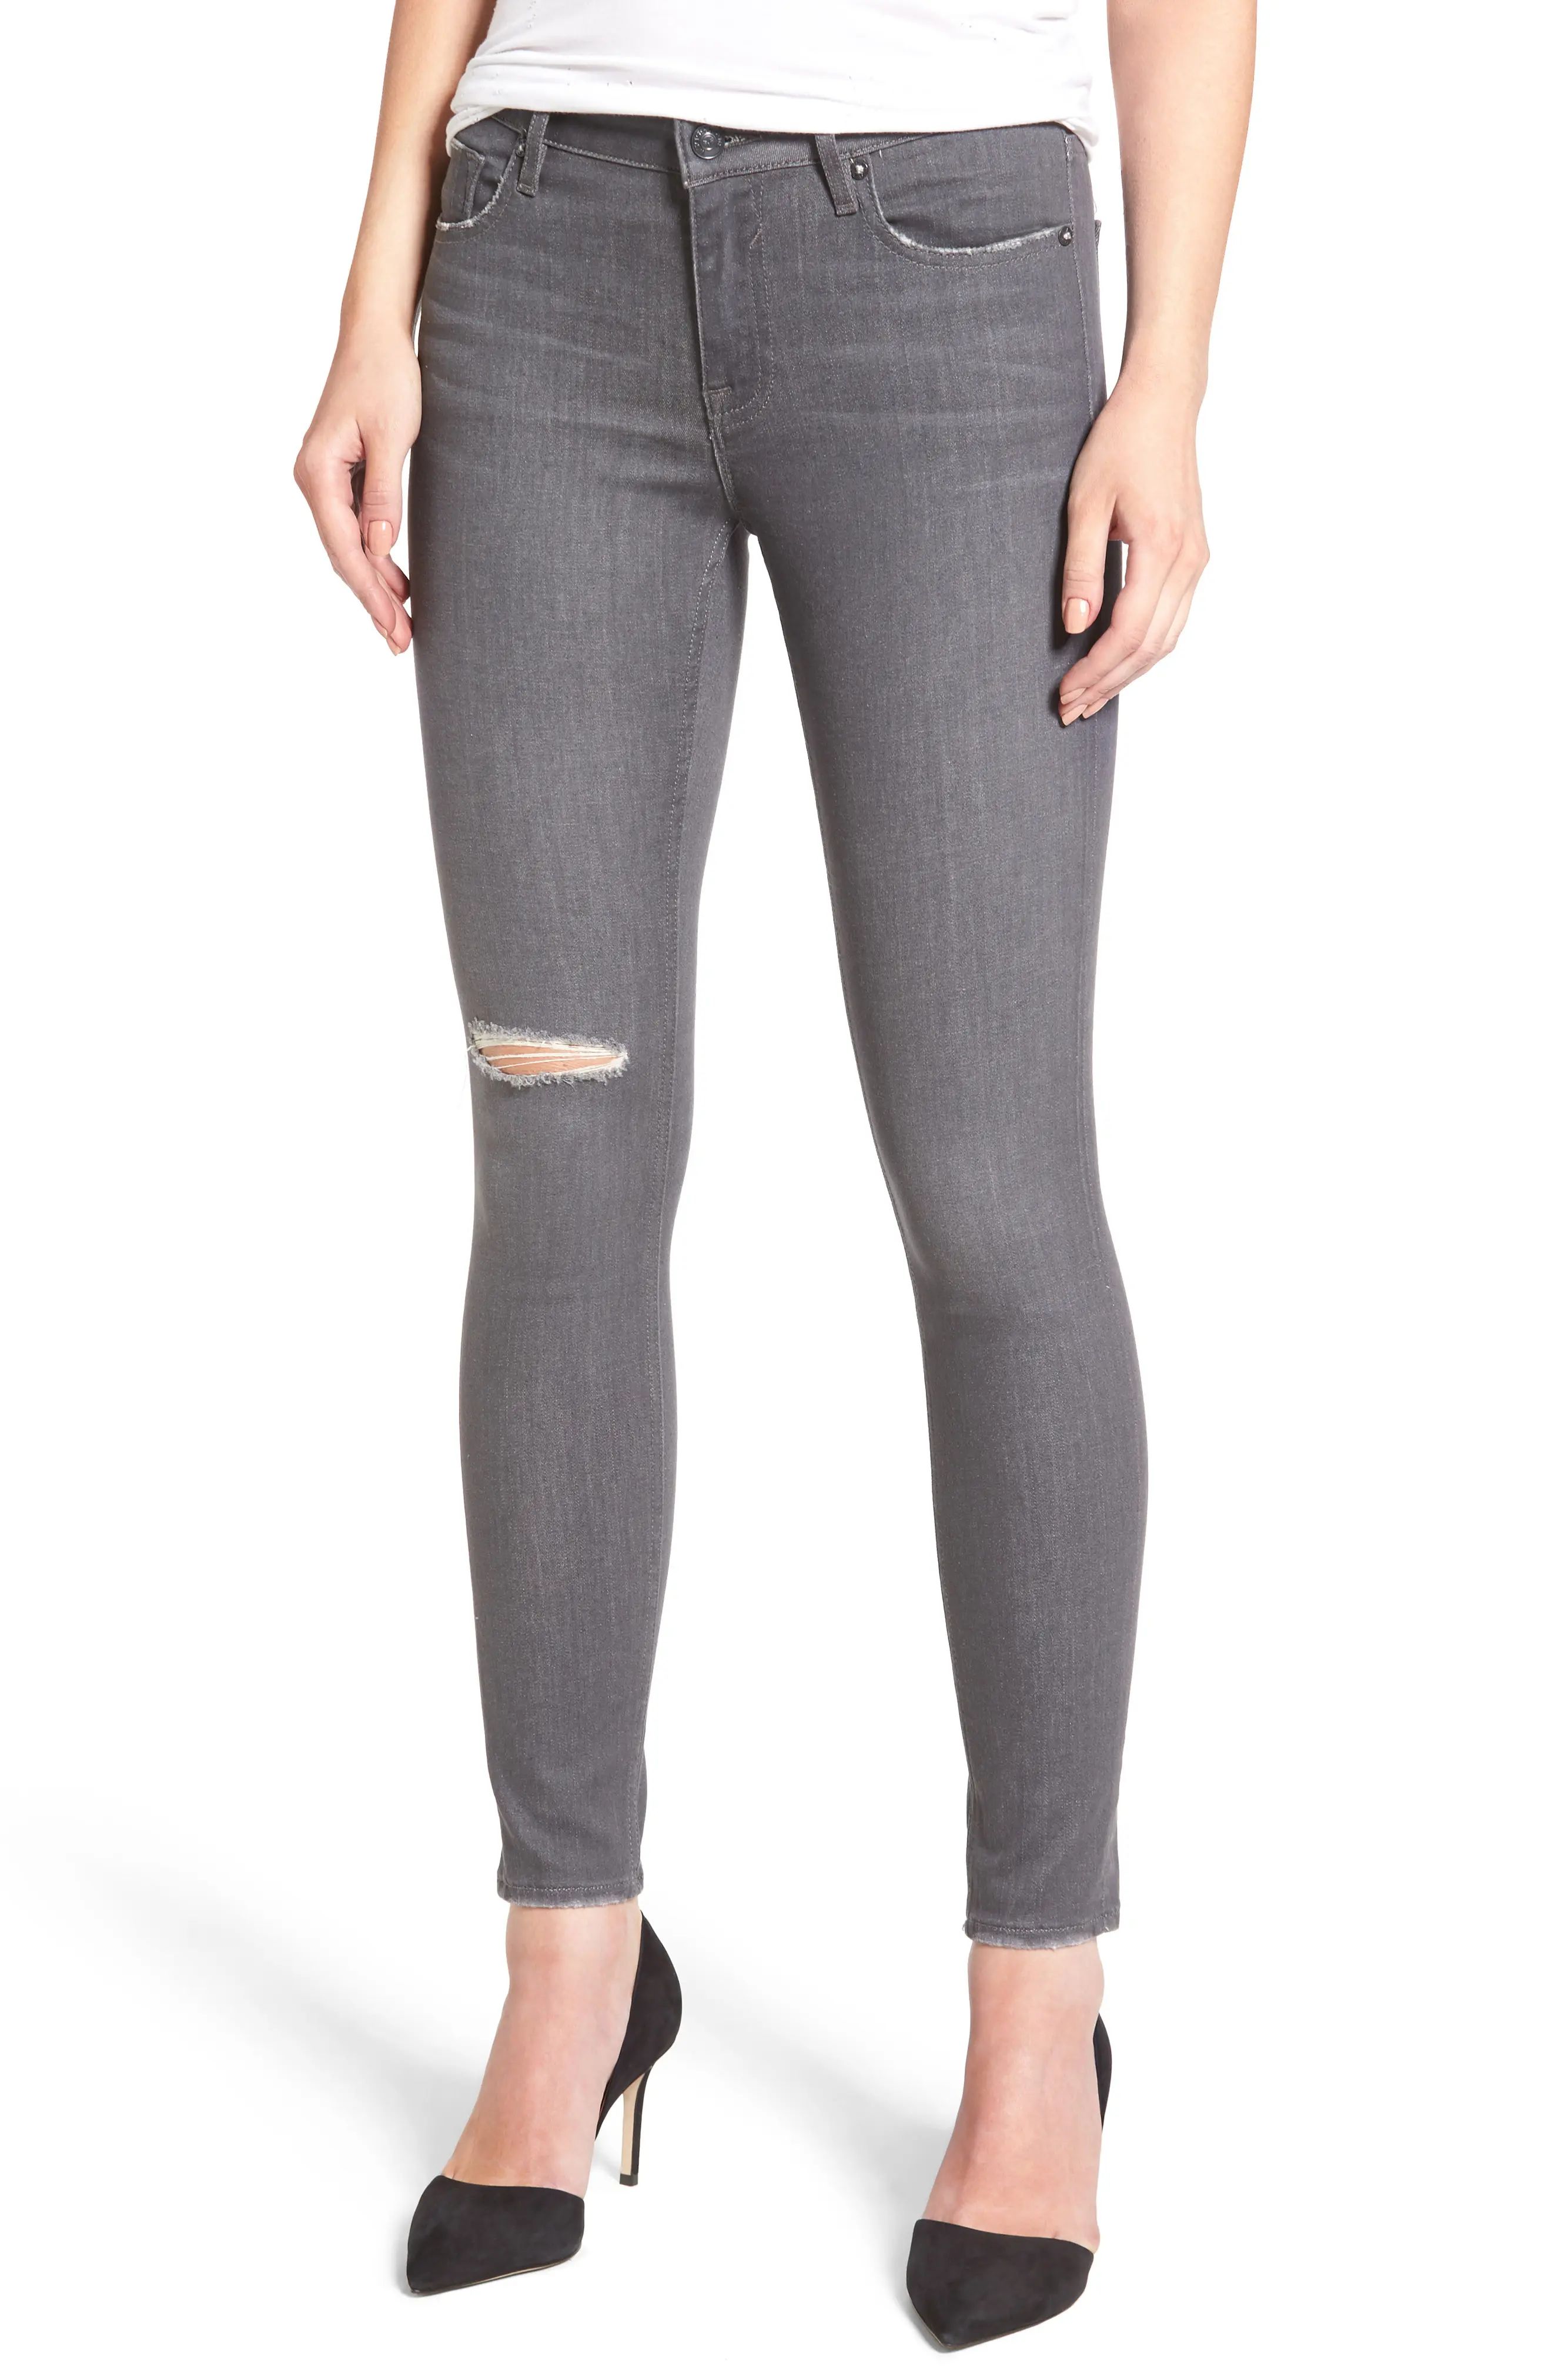 Marley Ripped Skinny Jeans | Nordstrom